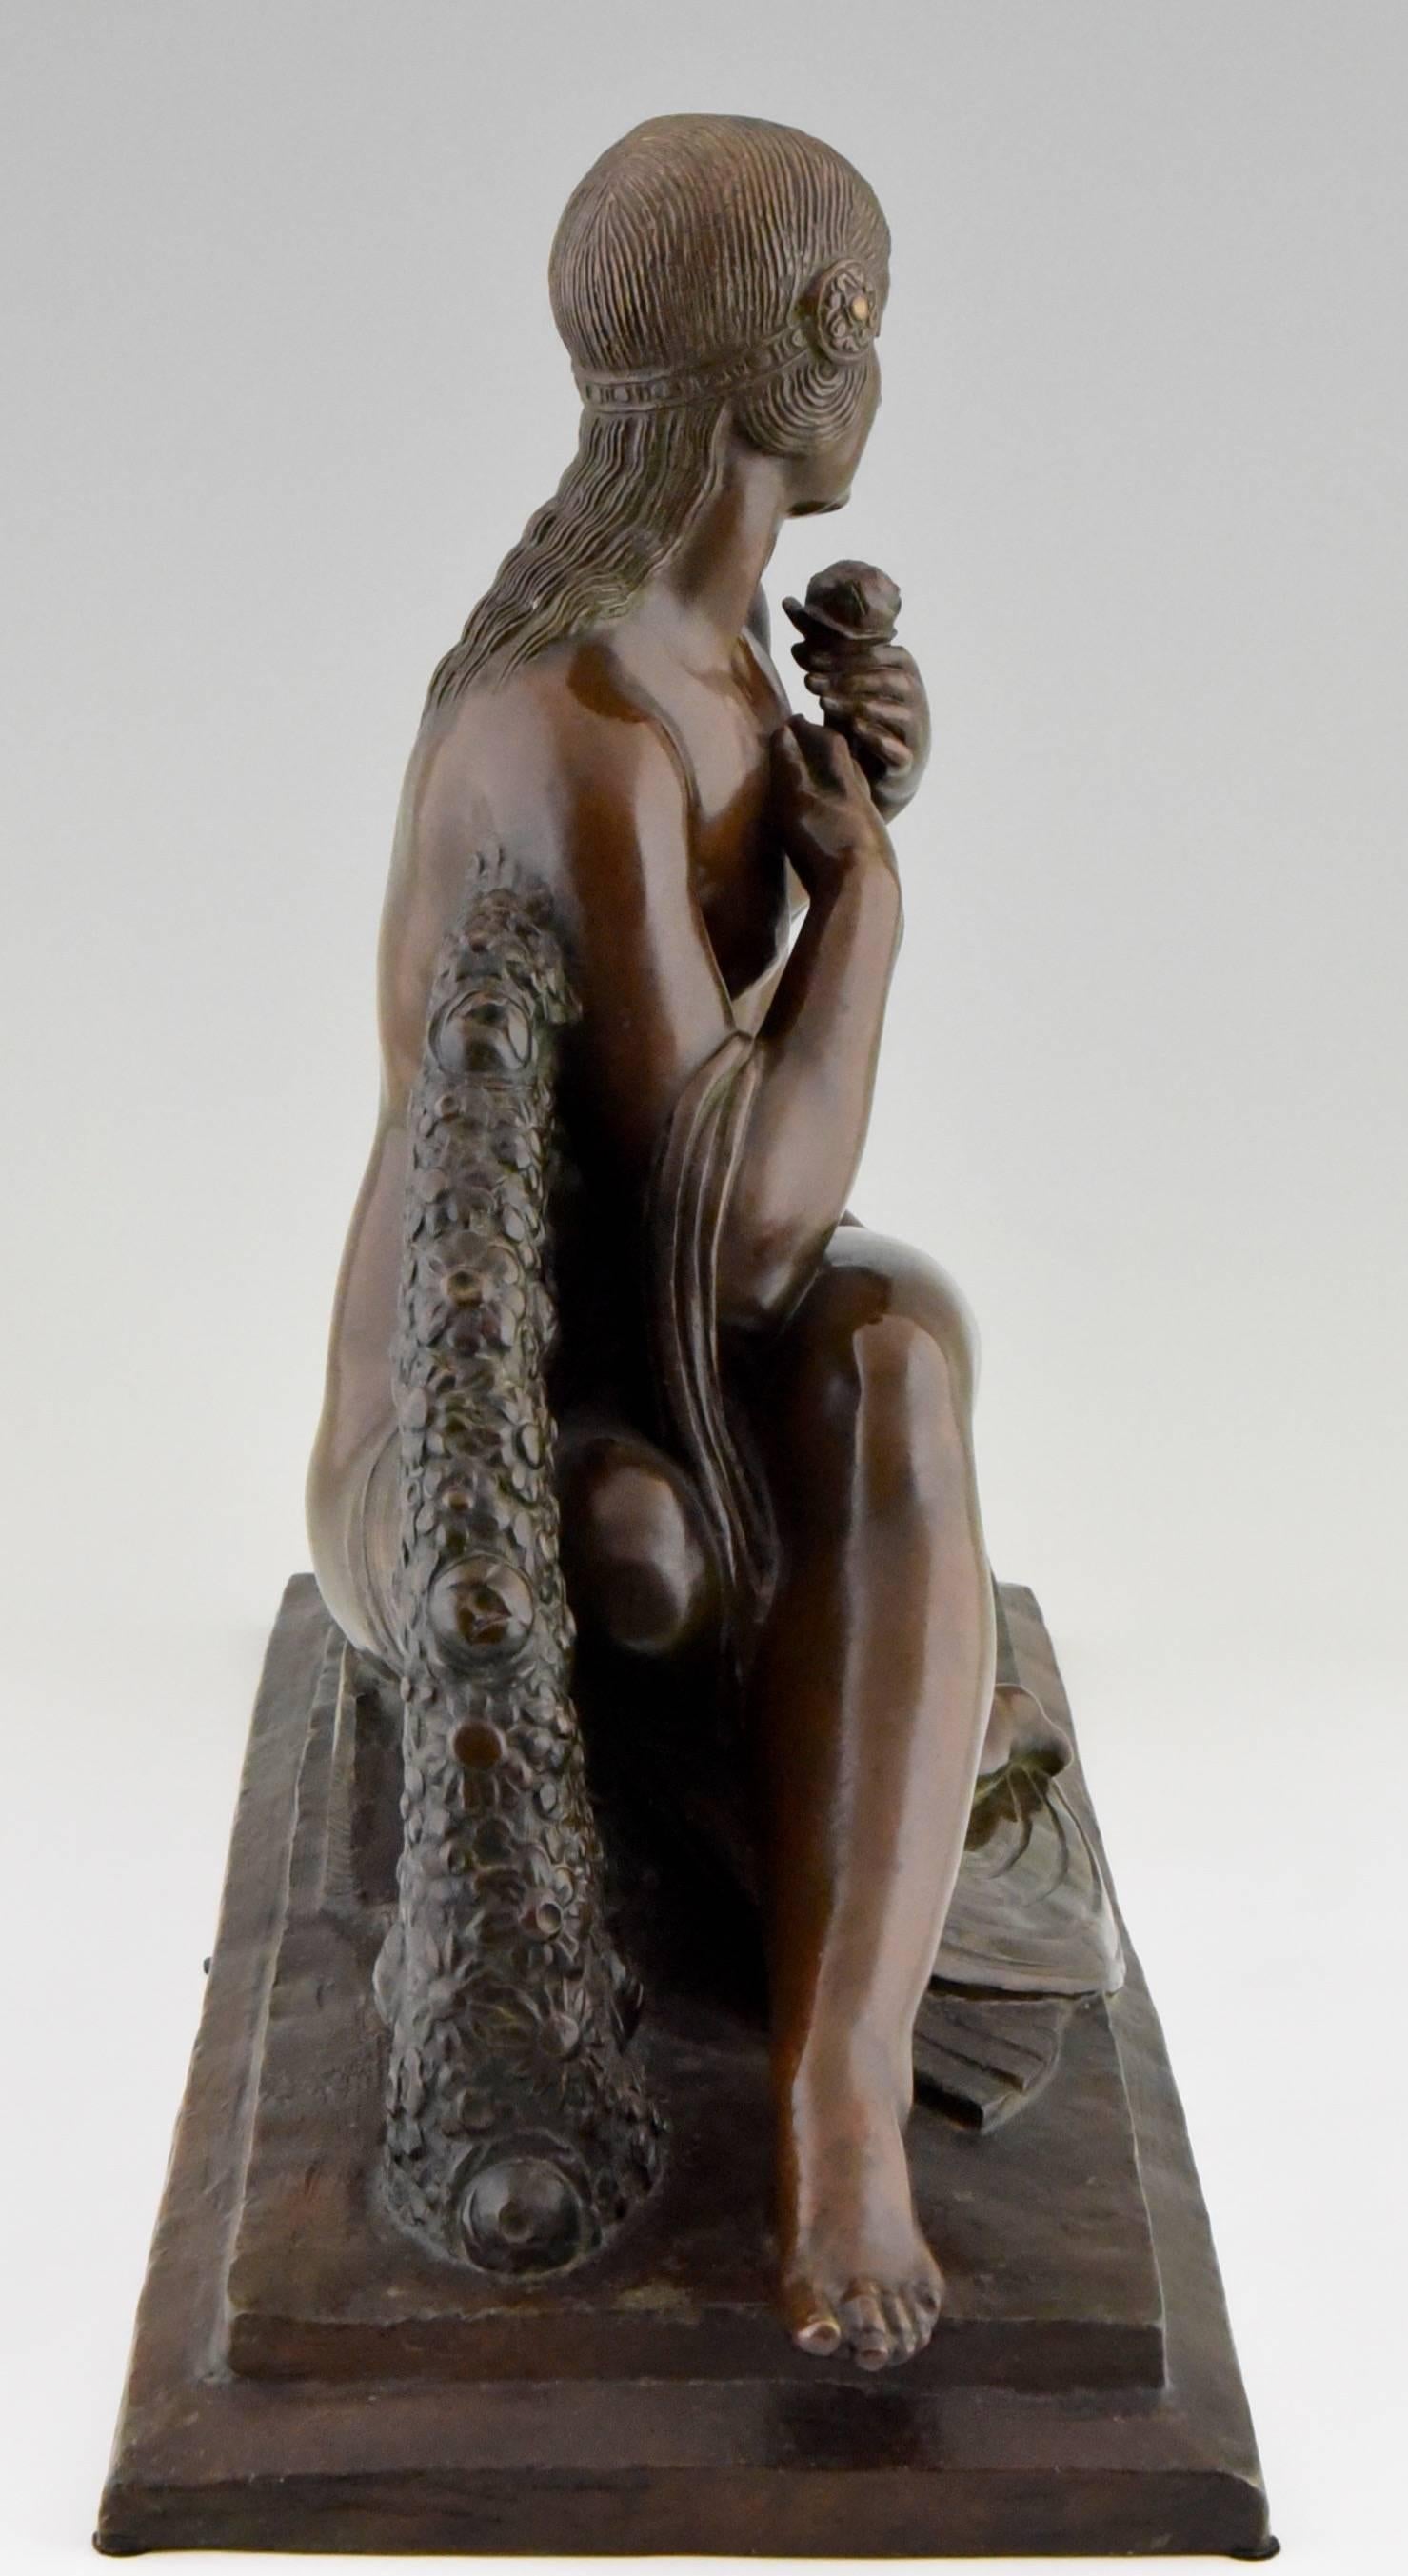 French Art Deco Sculpture of a Seated Nude by Joe Descomps, Etling Foundry France 1925